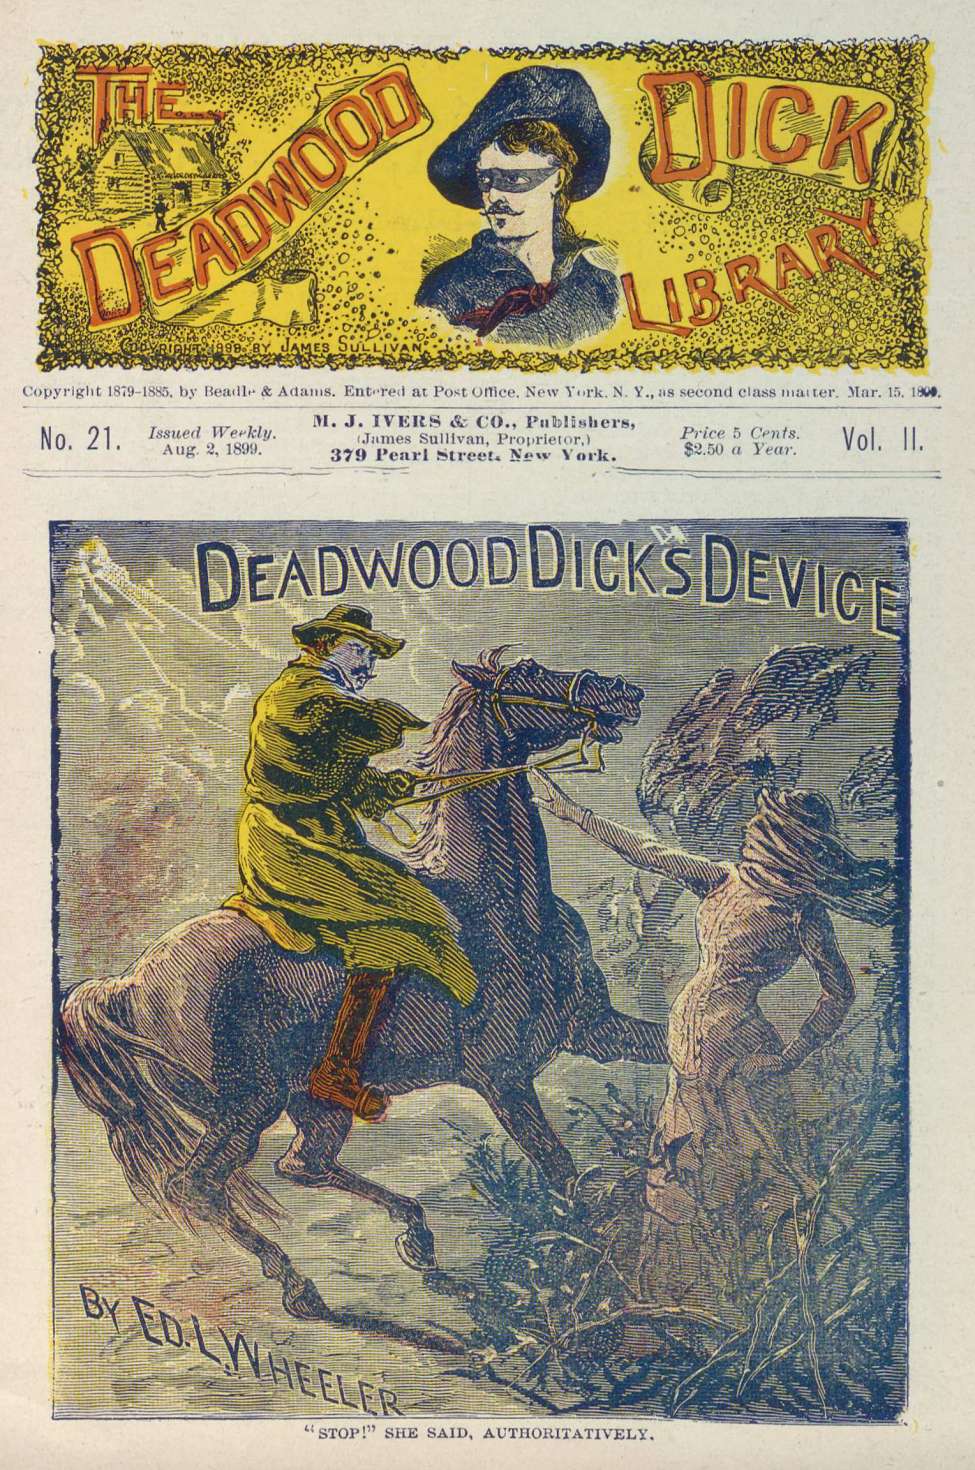 Book Cover For Deadwood Dick Library v2 21 - Deadwood Dick's Device